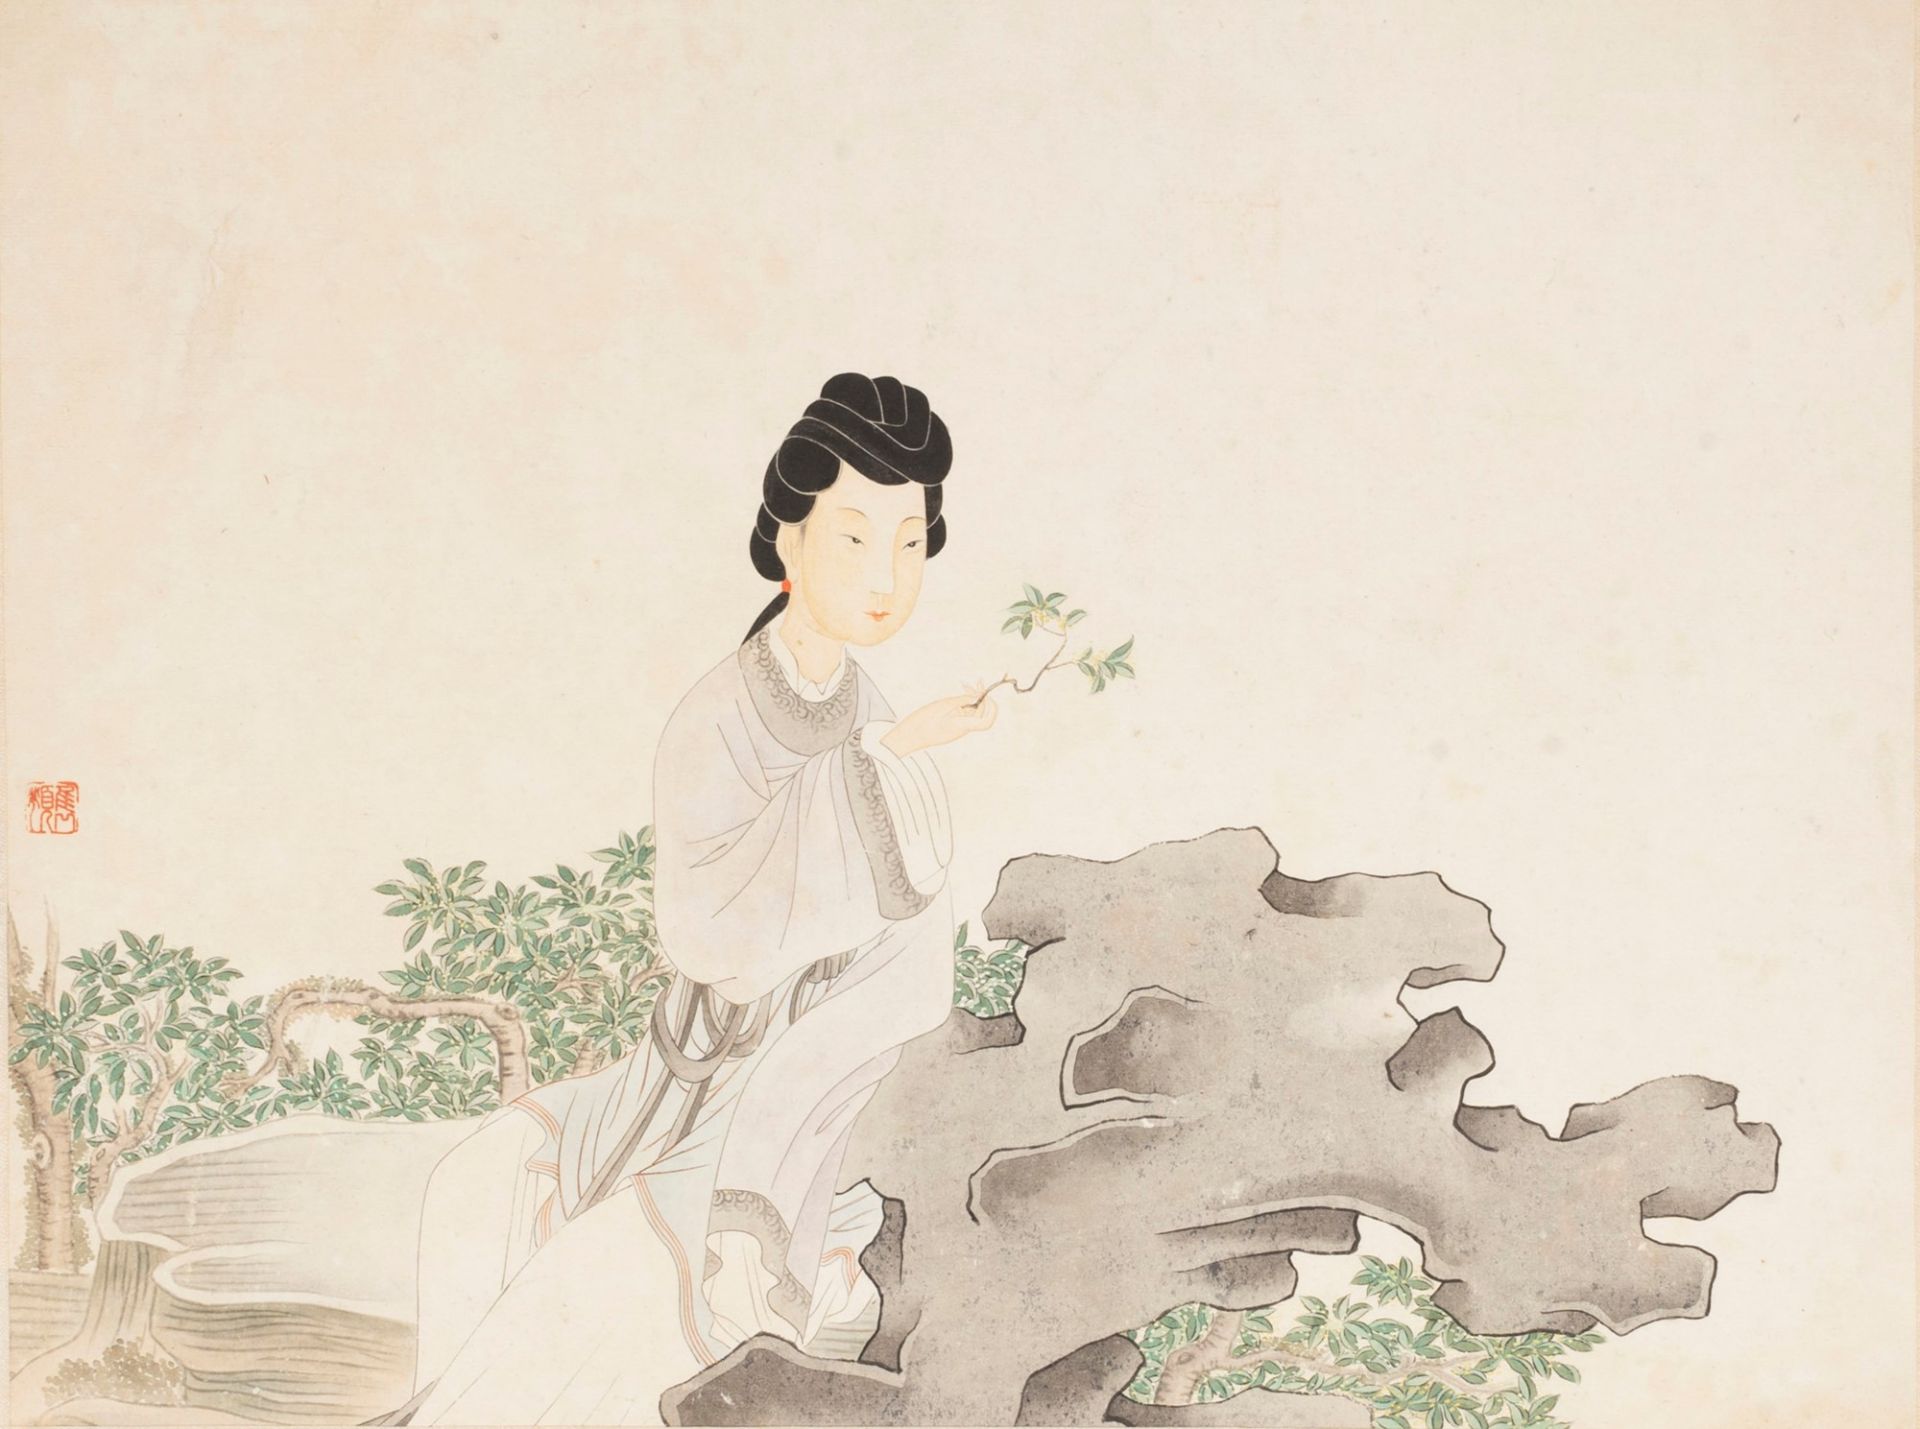 Lot consisting of three paintings with figures, China, 19th century